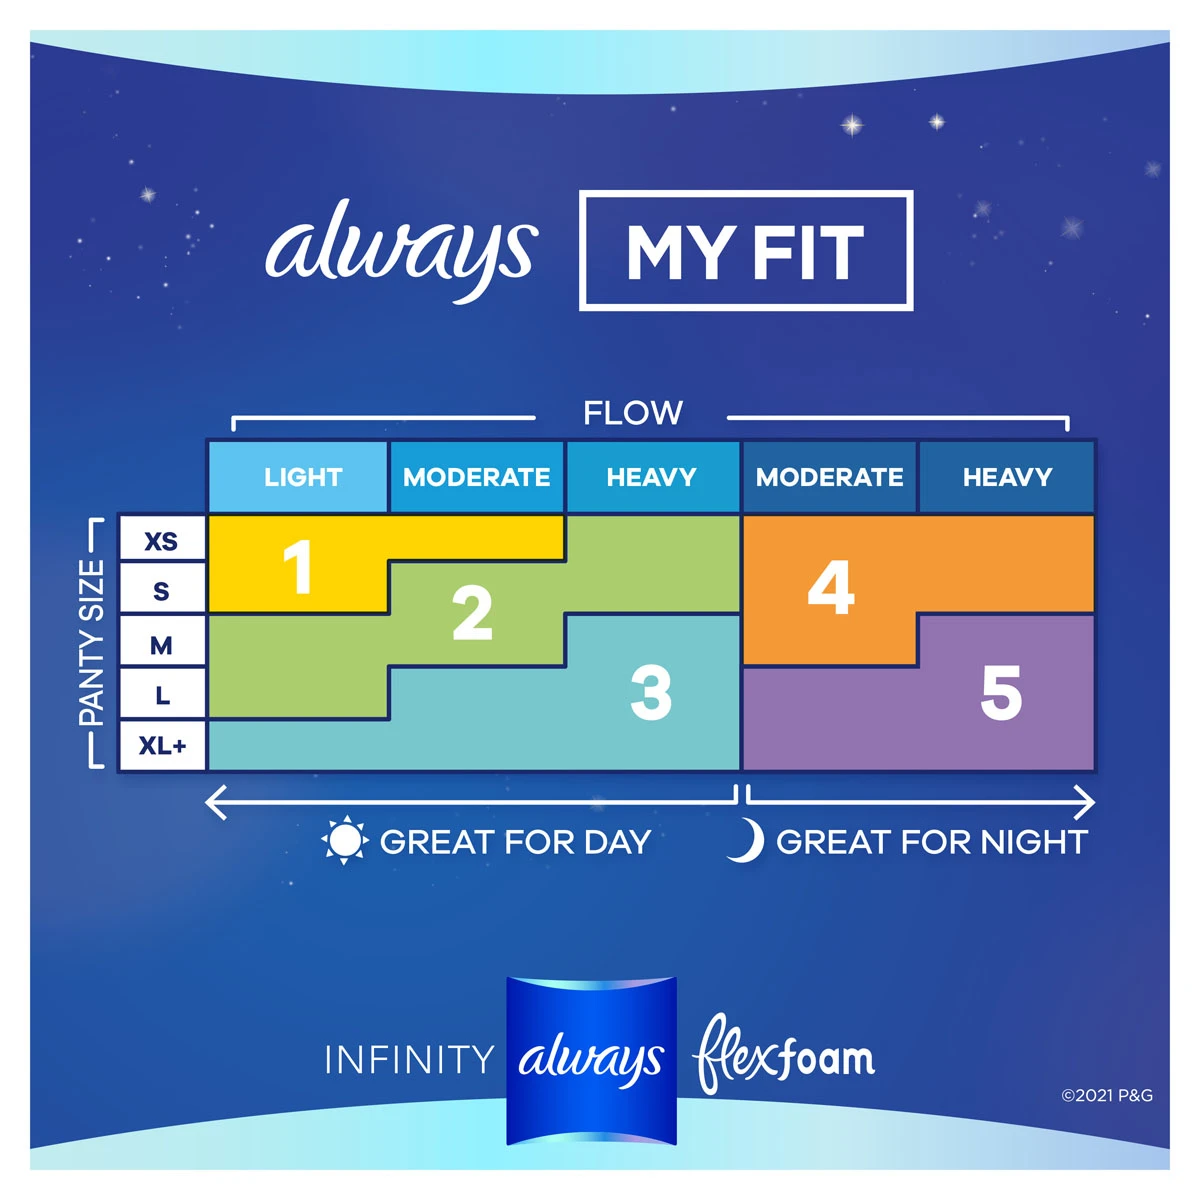 Always Pads, with Flexi-Wings, Extra Heavy Overnight, Unscented, Size 5 18  ea